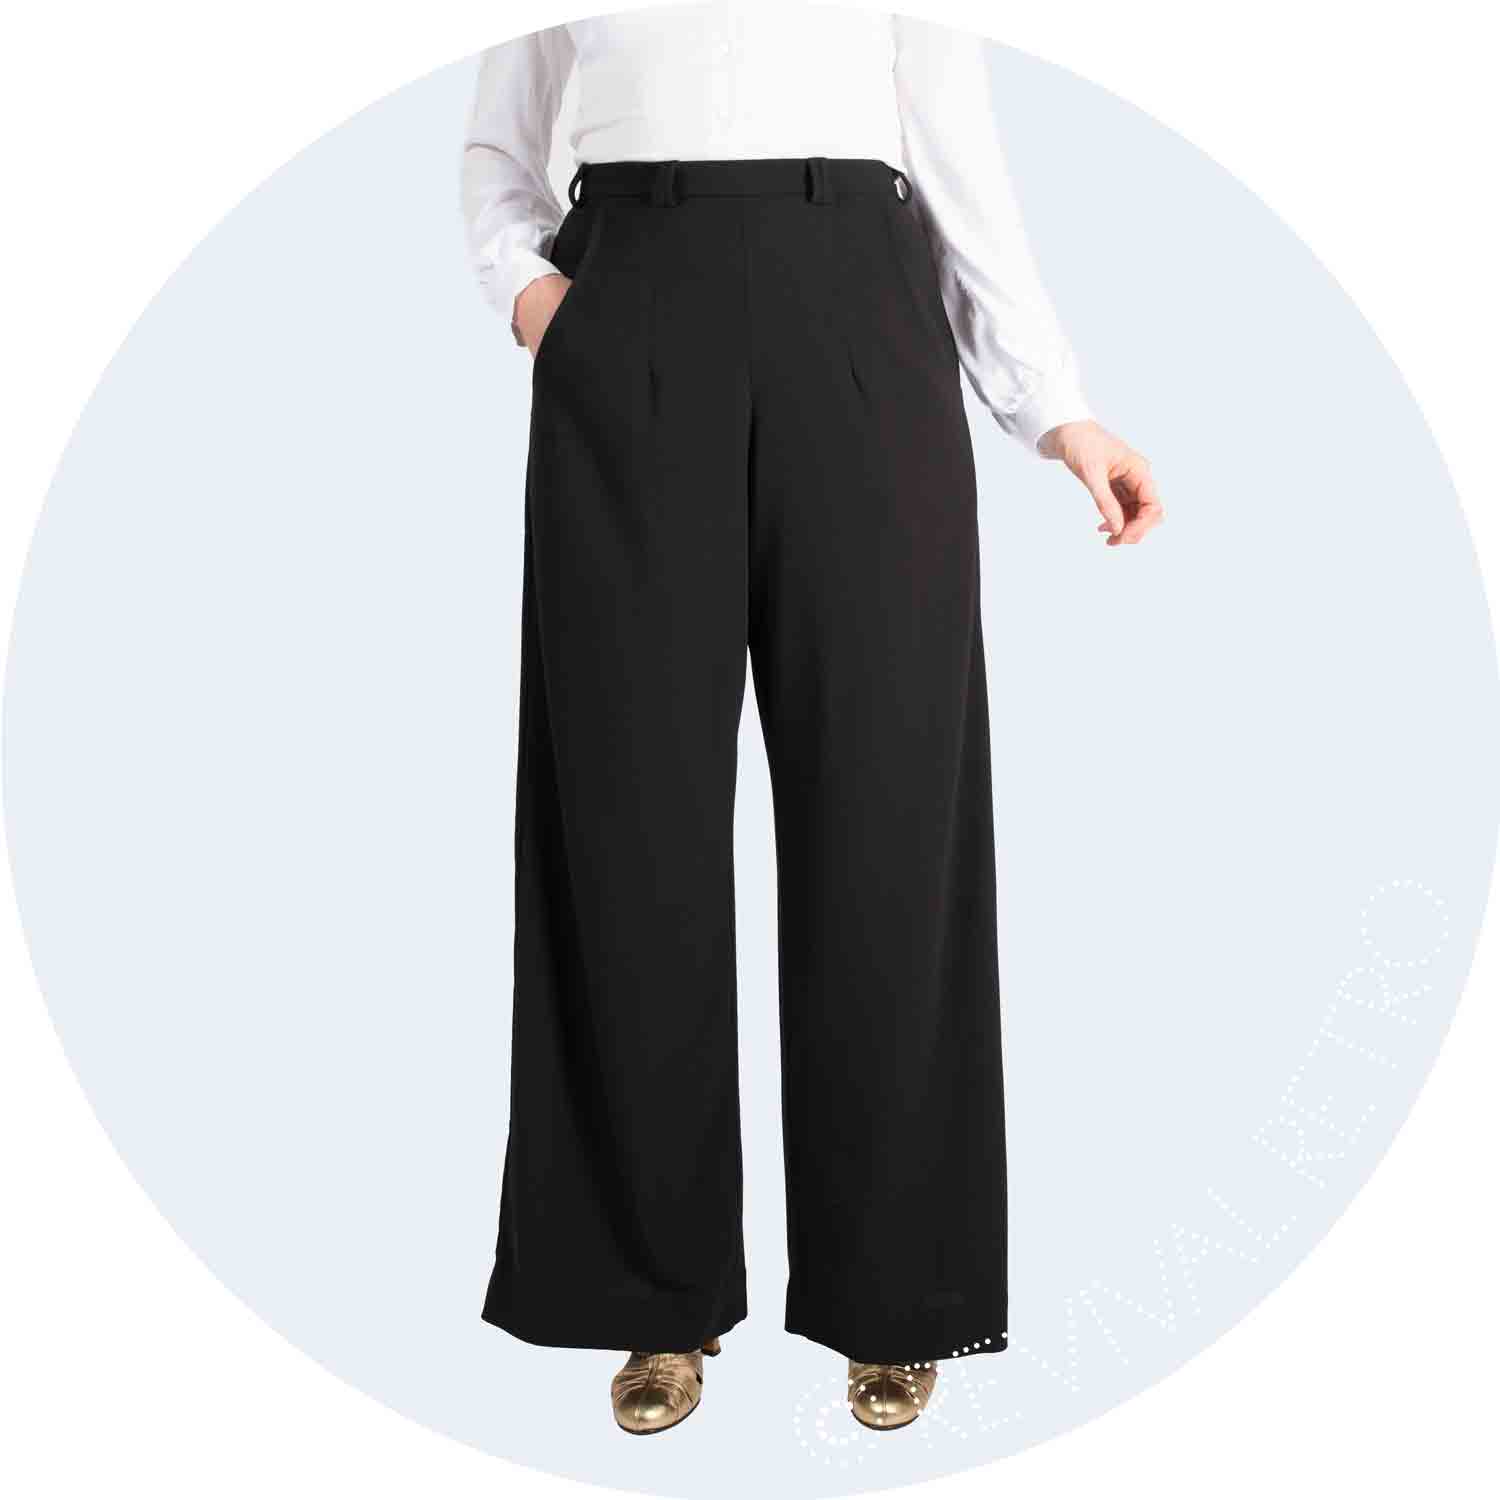 1940s high waist, wide leg trousers in black crepe